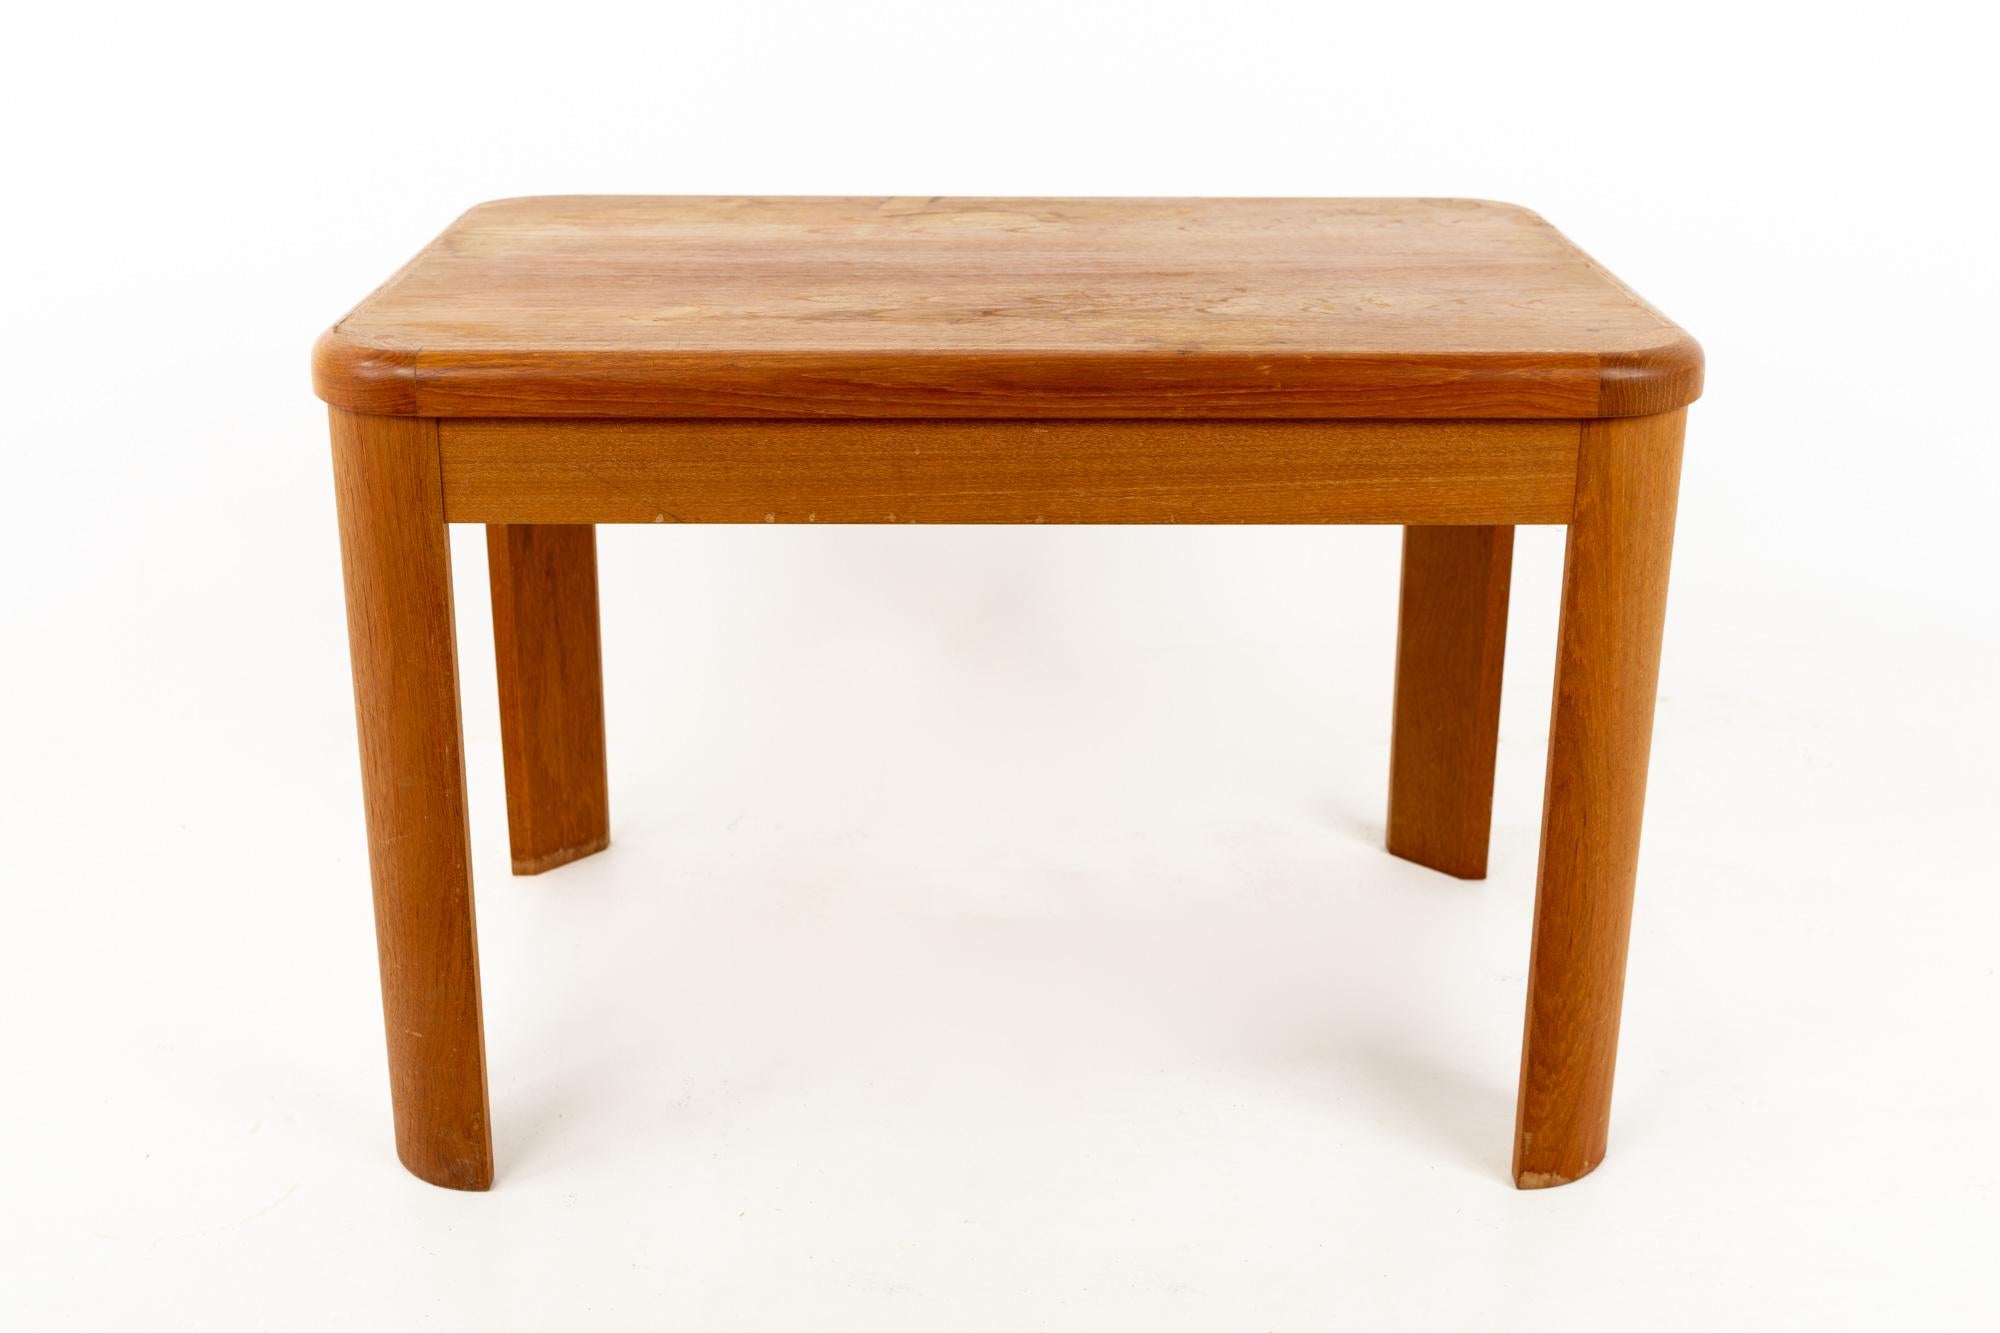 Nordic Furniture mid century teak end table.

This table is 29.75 wide x 20 deep x 20 inches high.

All pieces of furniture can be had in what we call restored vintage condition. That means the piece is restored upon purchase so it’s free of